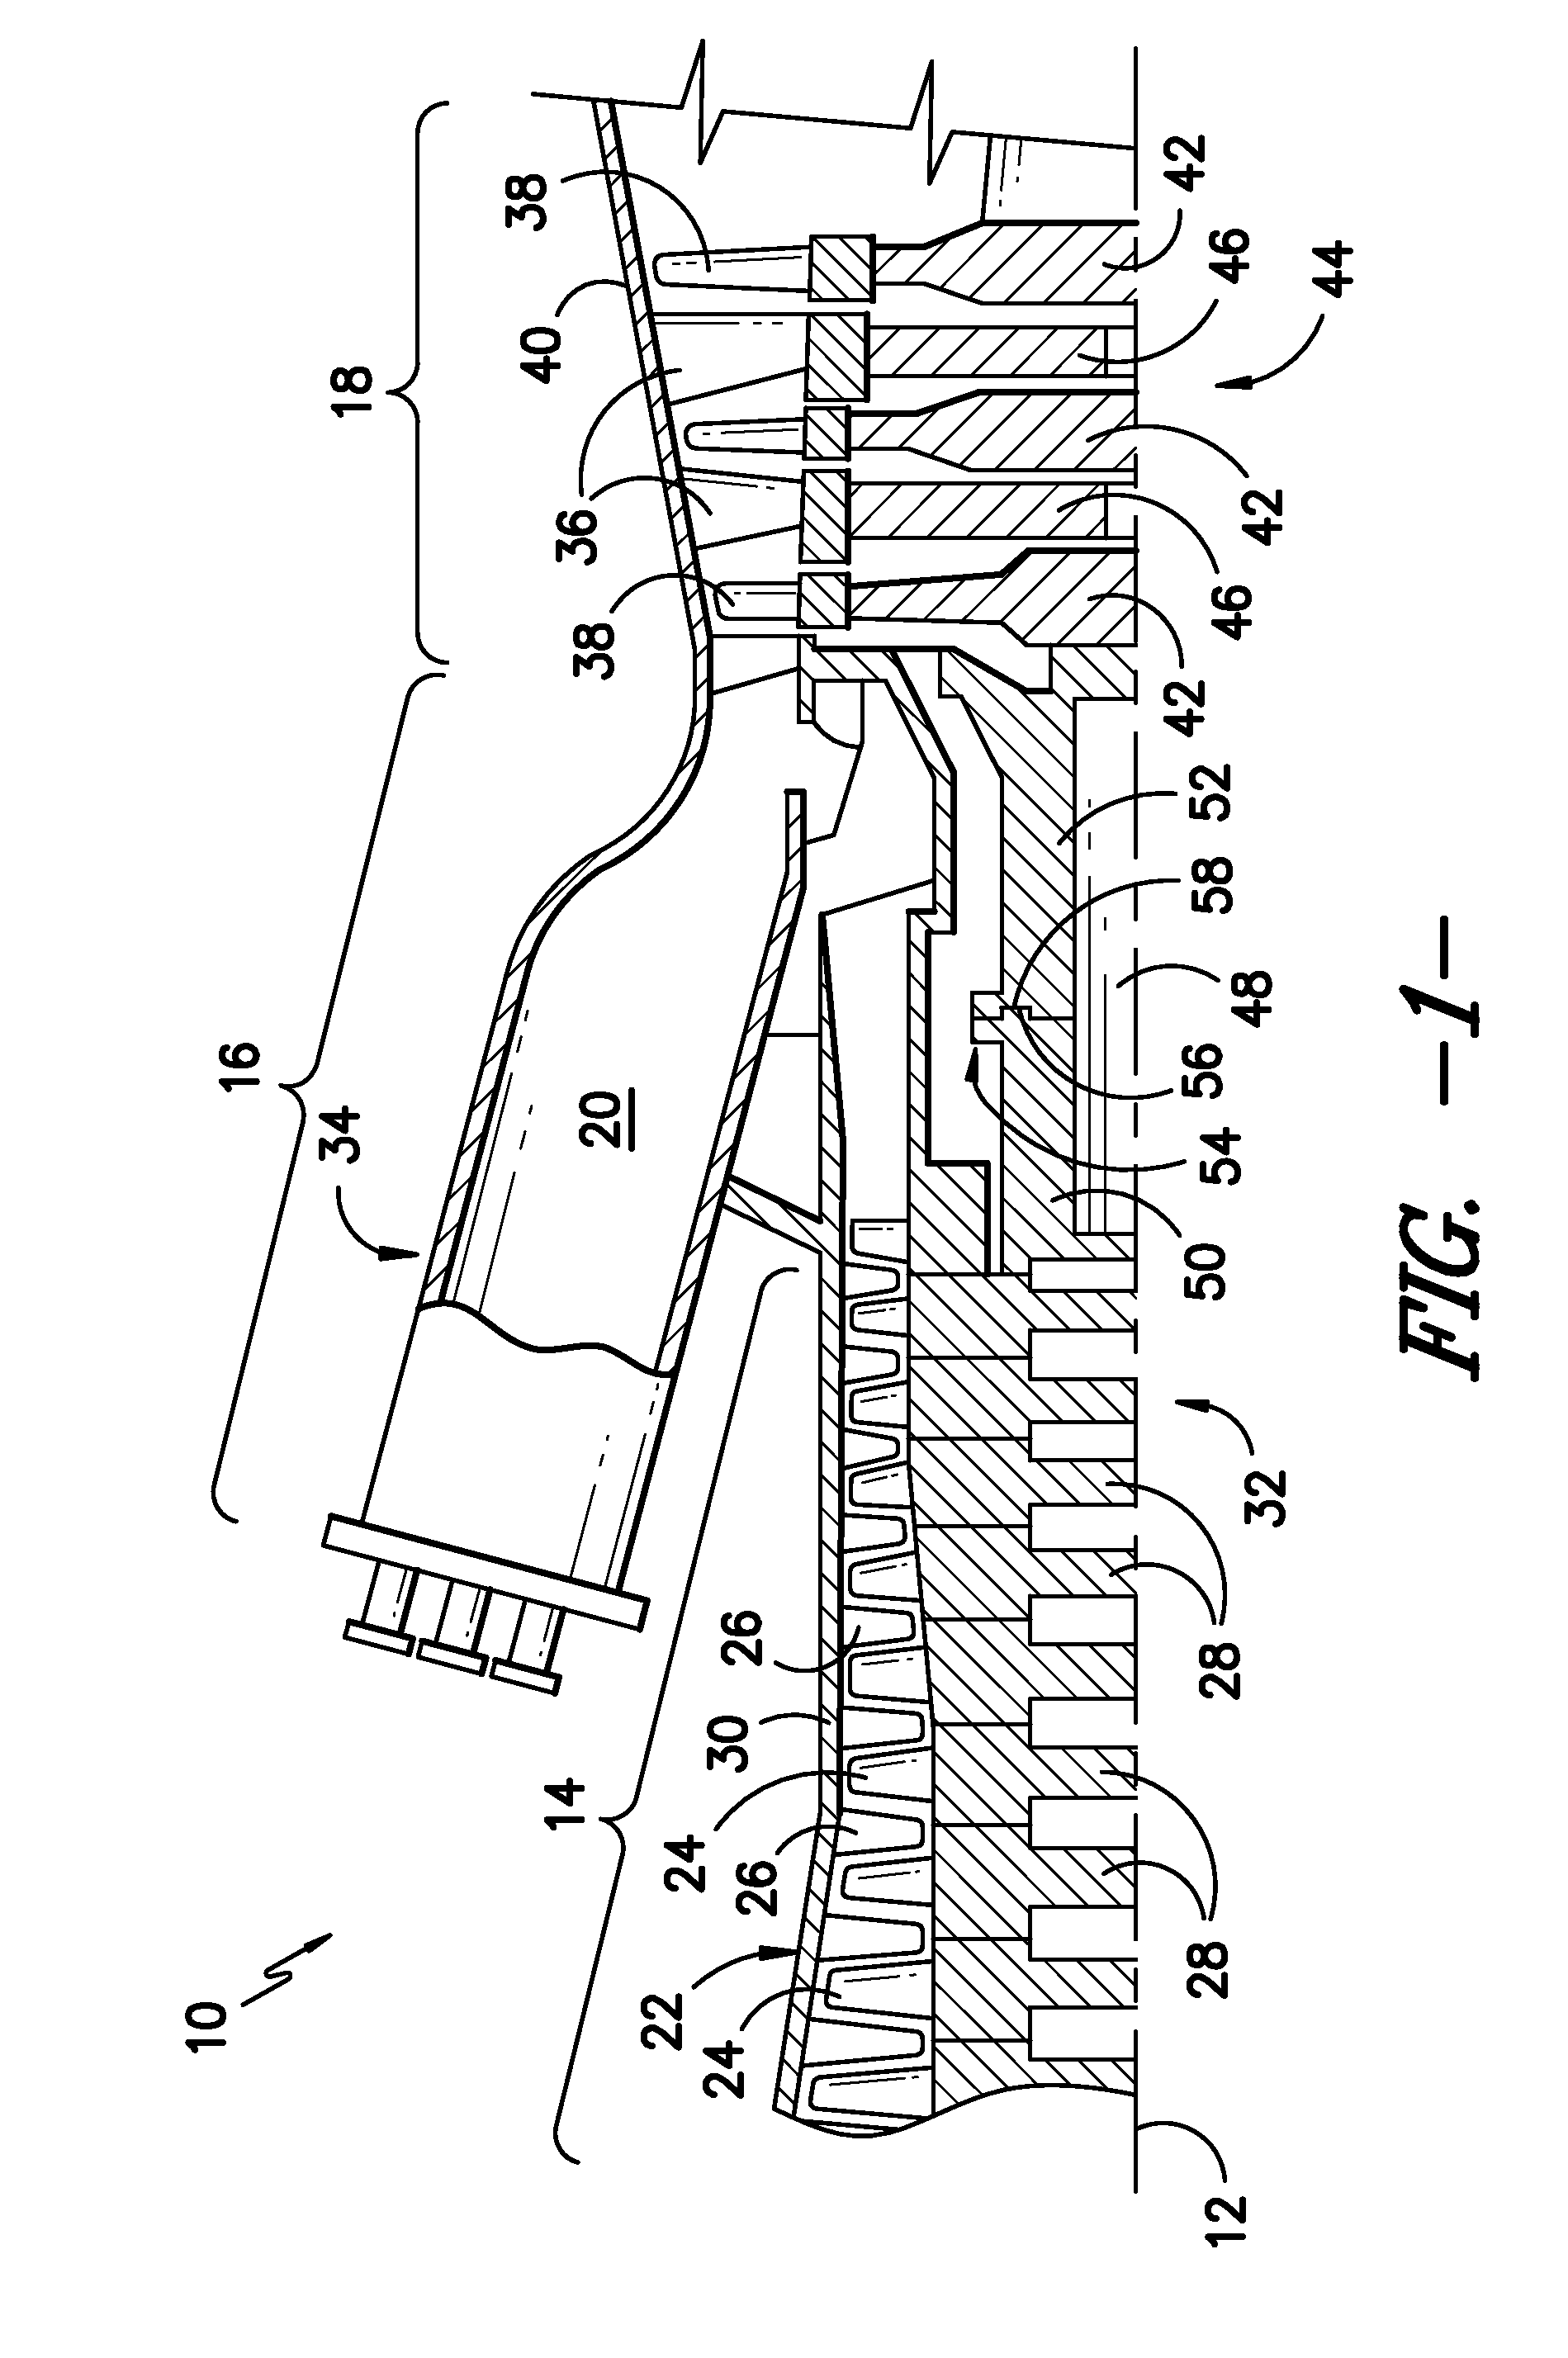 Modified rotor component and method for modifying a wear characteristic of a rotor component in a turbine system